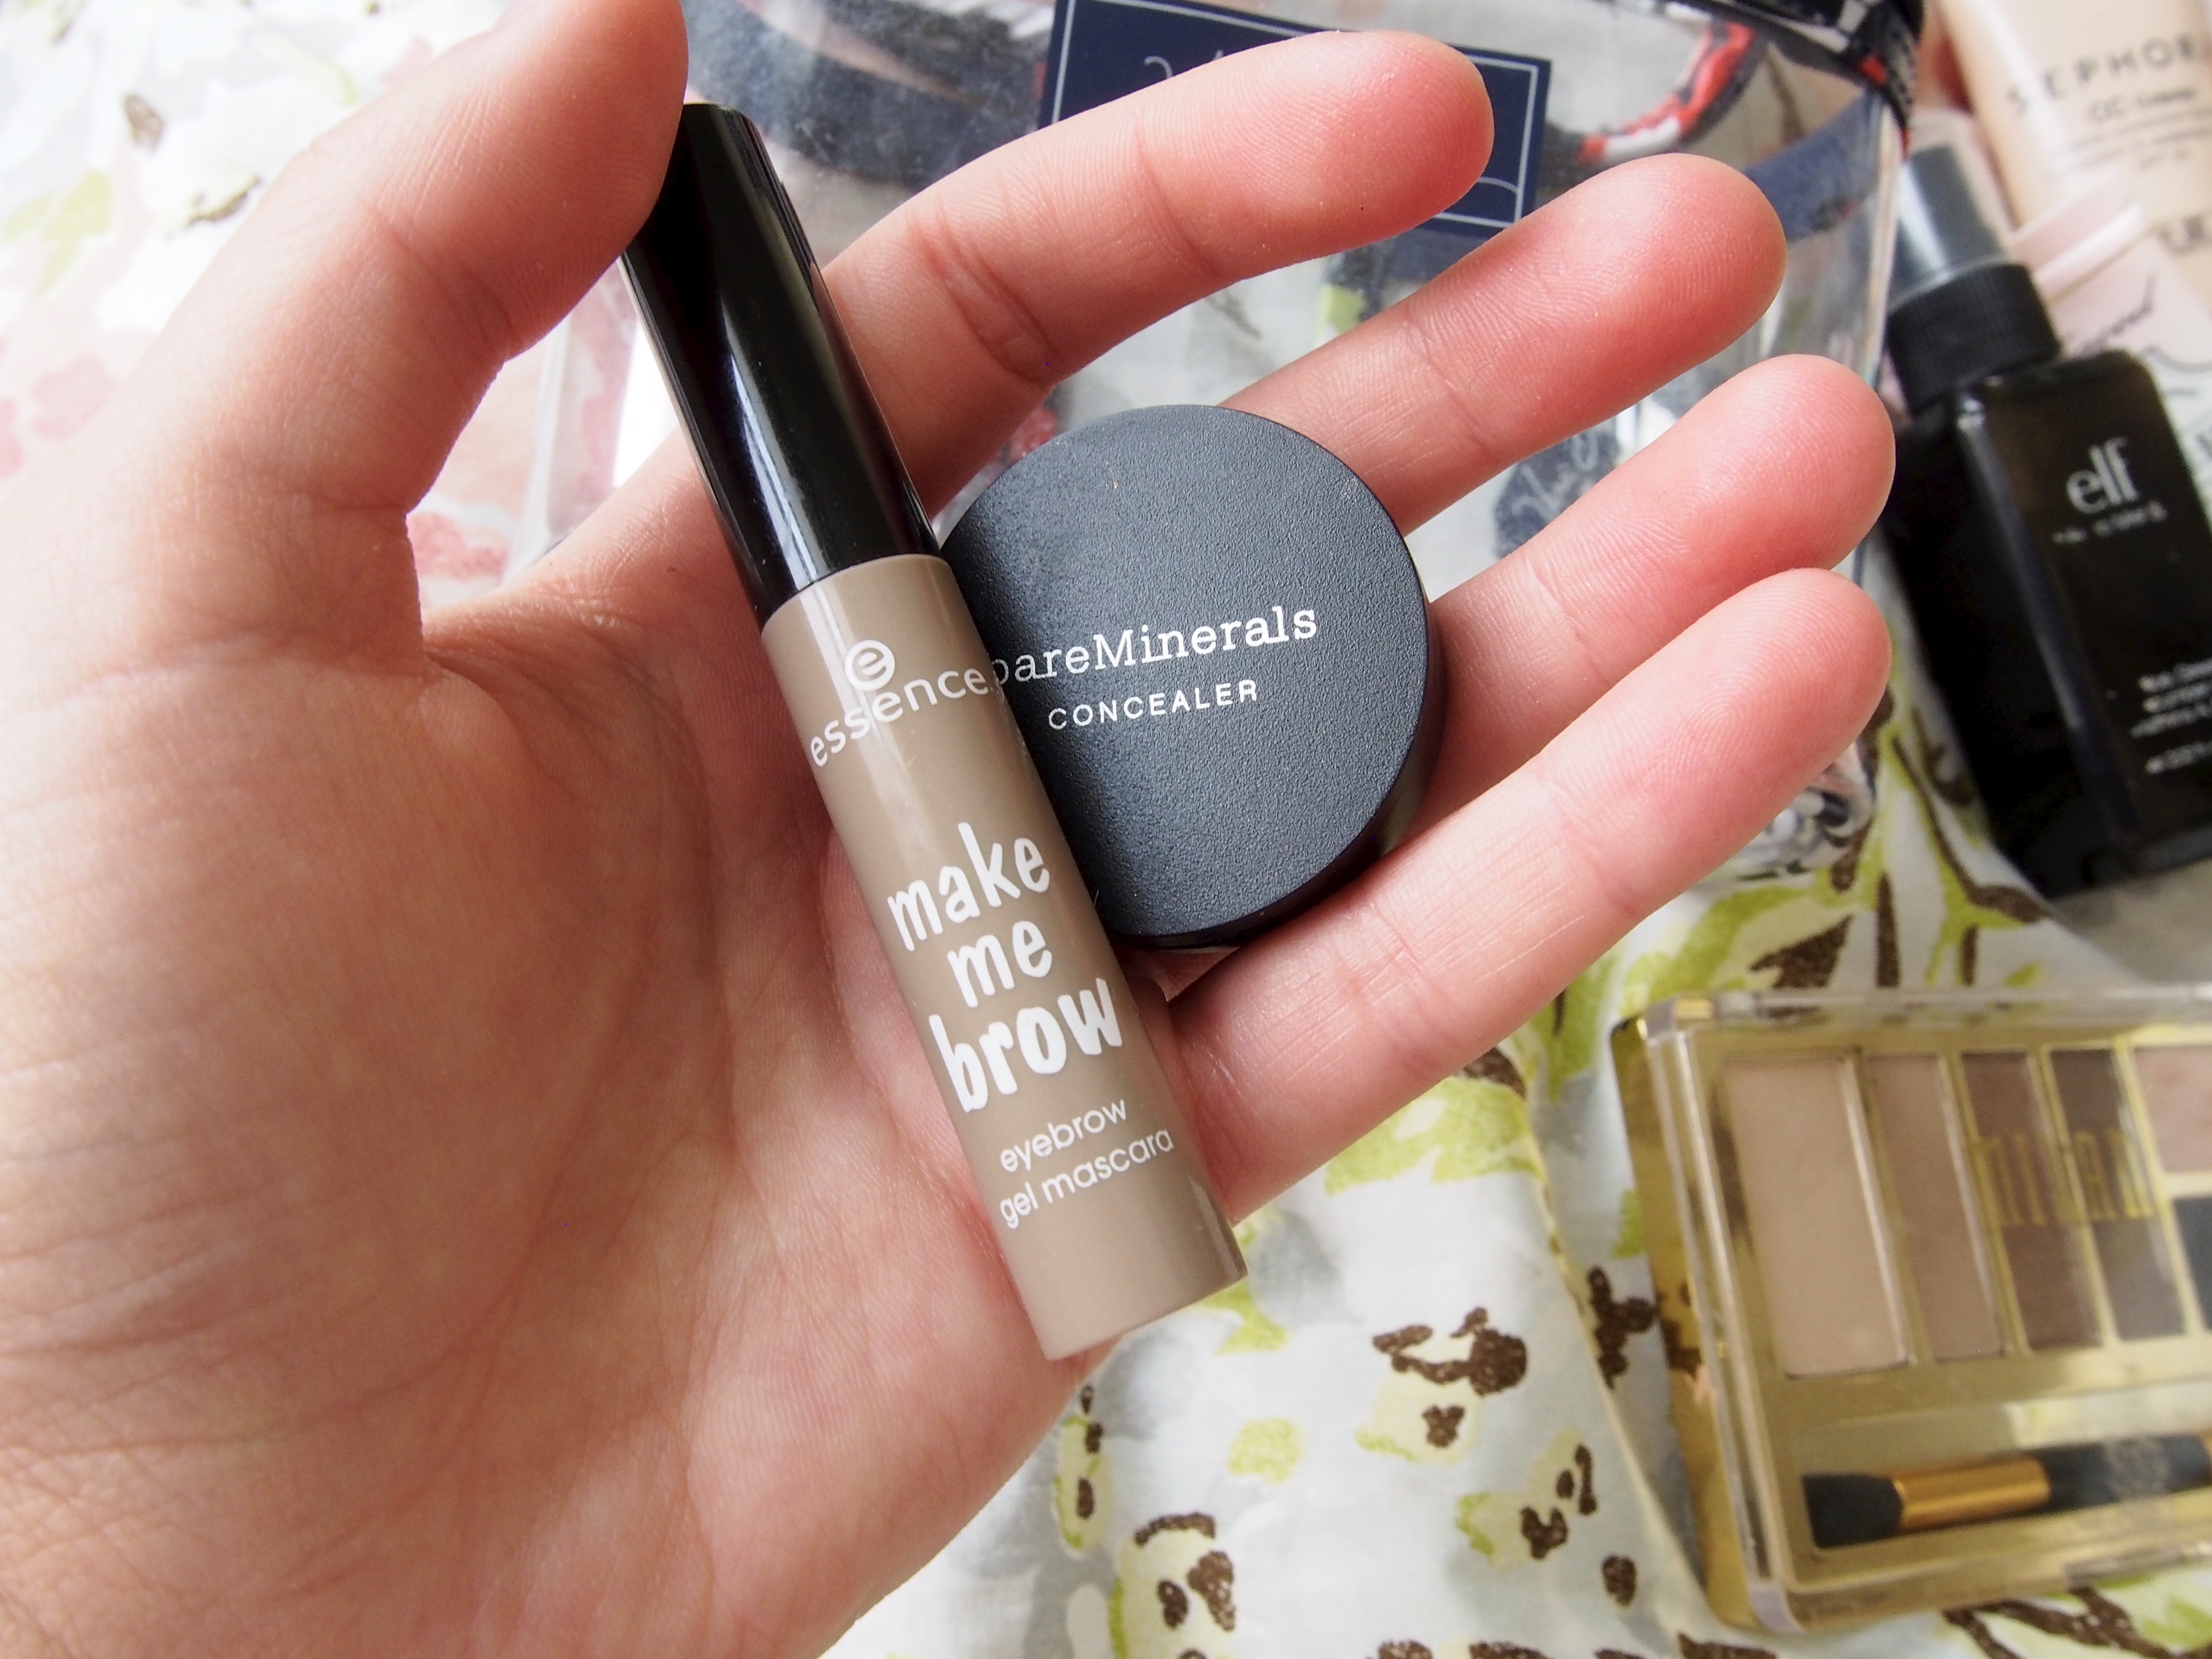 Makeup To Use Up - Essence Make Me Brow and BareMinerals Concealer